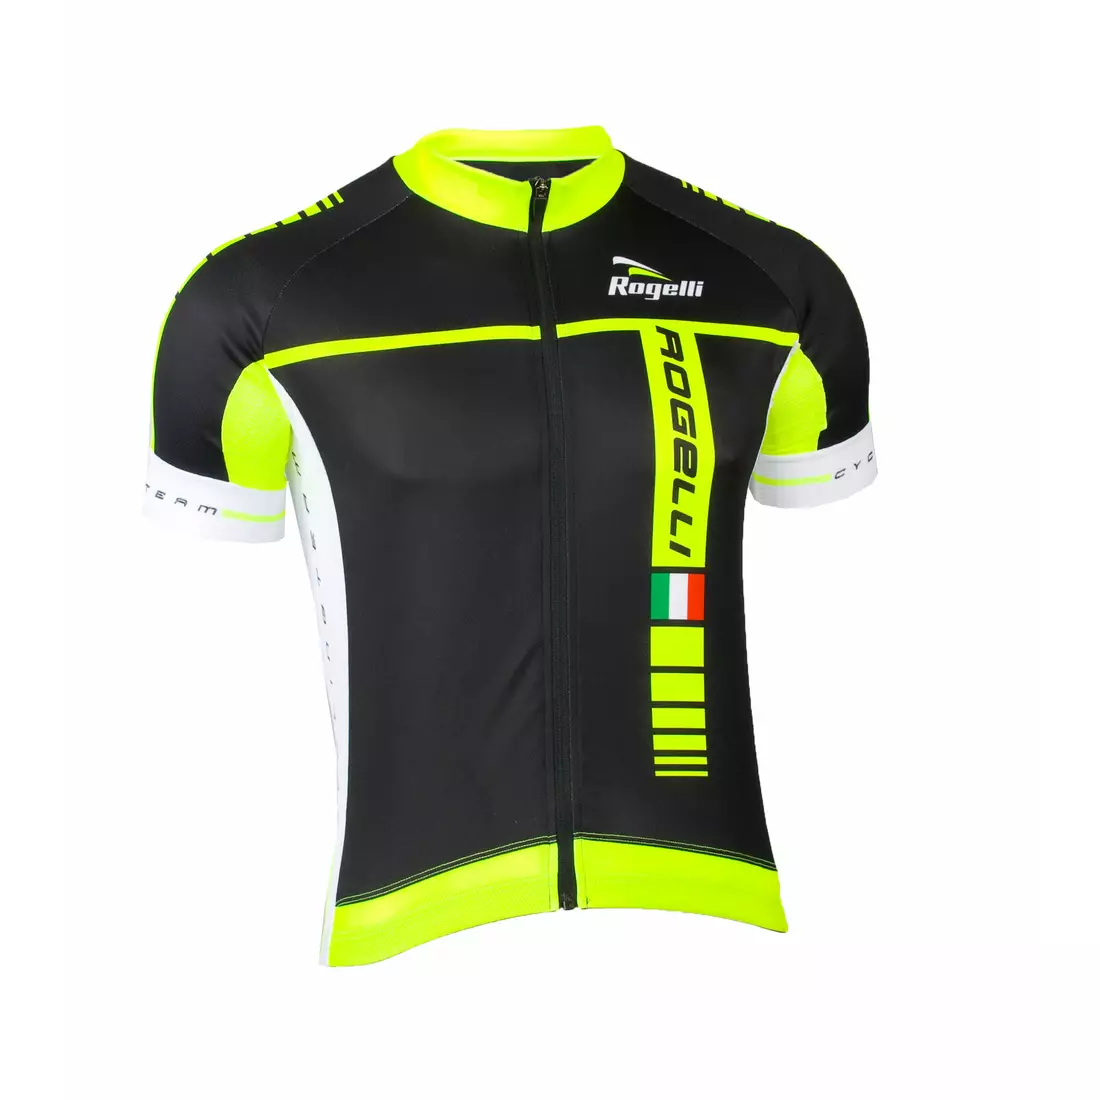 ROGELLI UMBRIA men's cycling jersey, 001.230, Black and fluoro